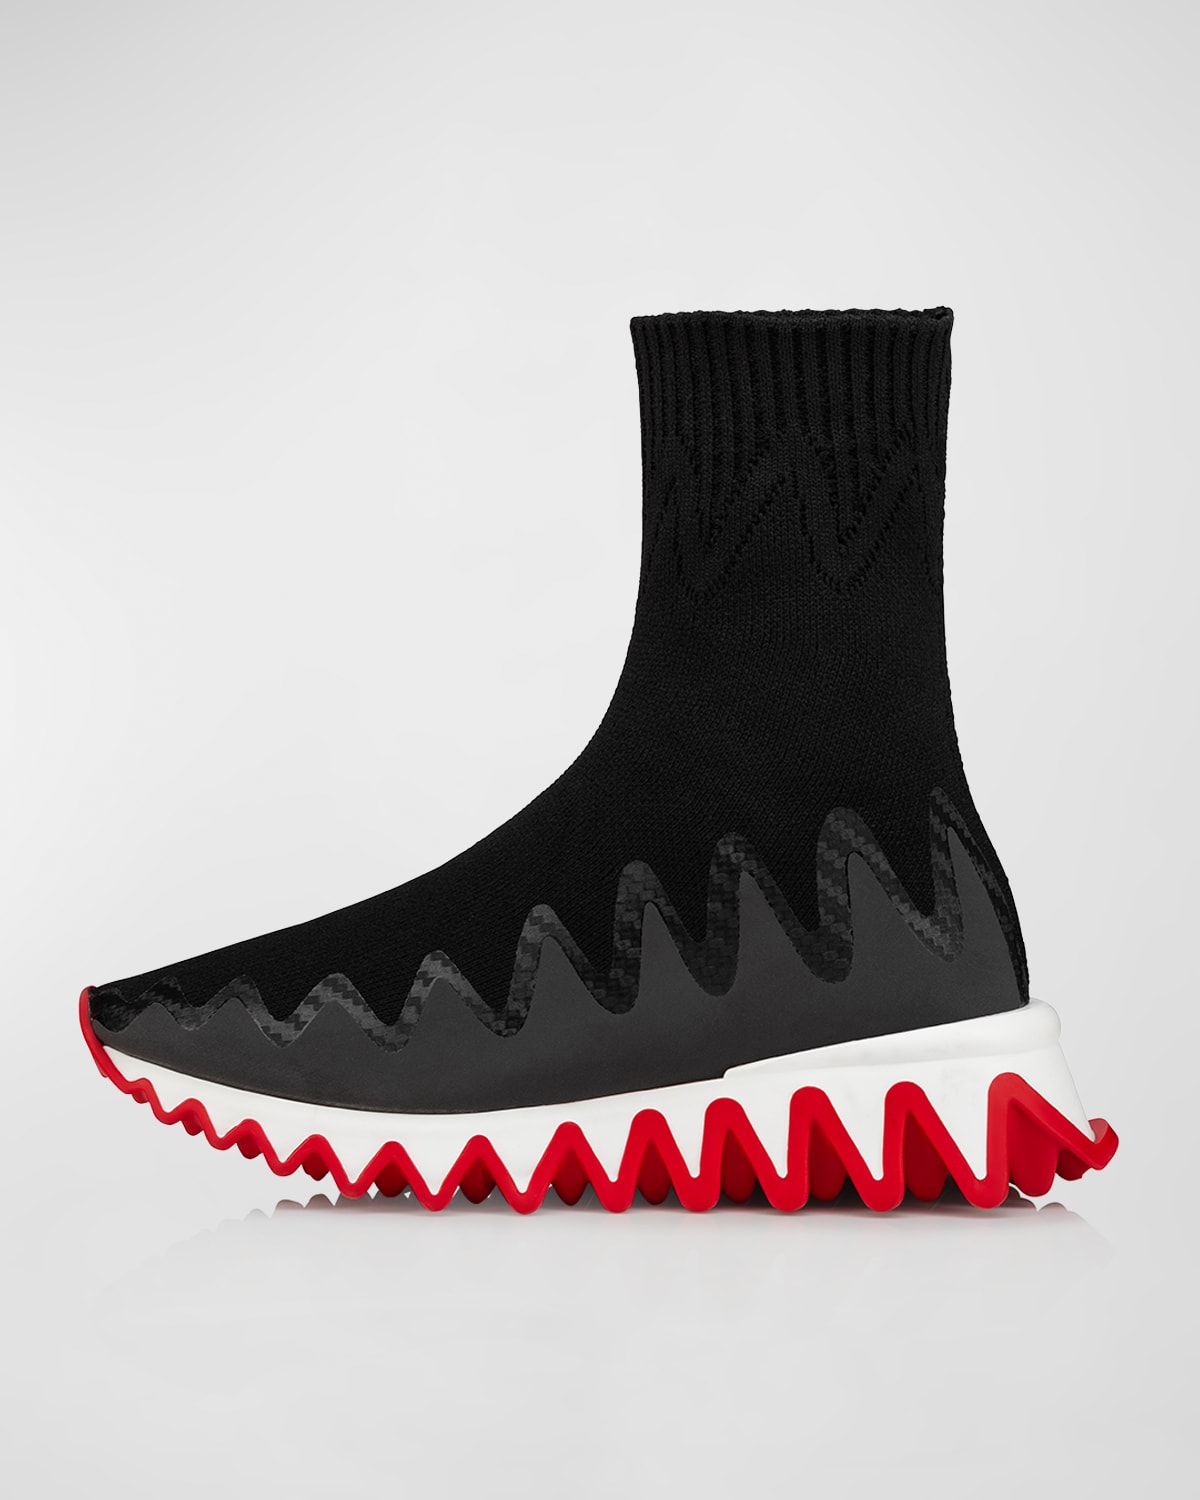 CHRISTIAN LOUBOUTIN KID'S SHARKY PULL-ON SOCK SNEAKERS, TODDLERS/KIDS